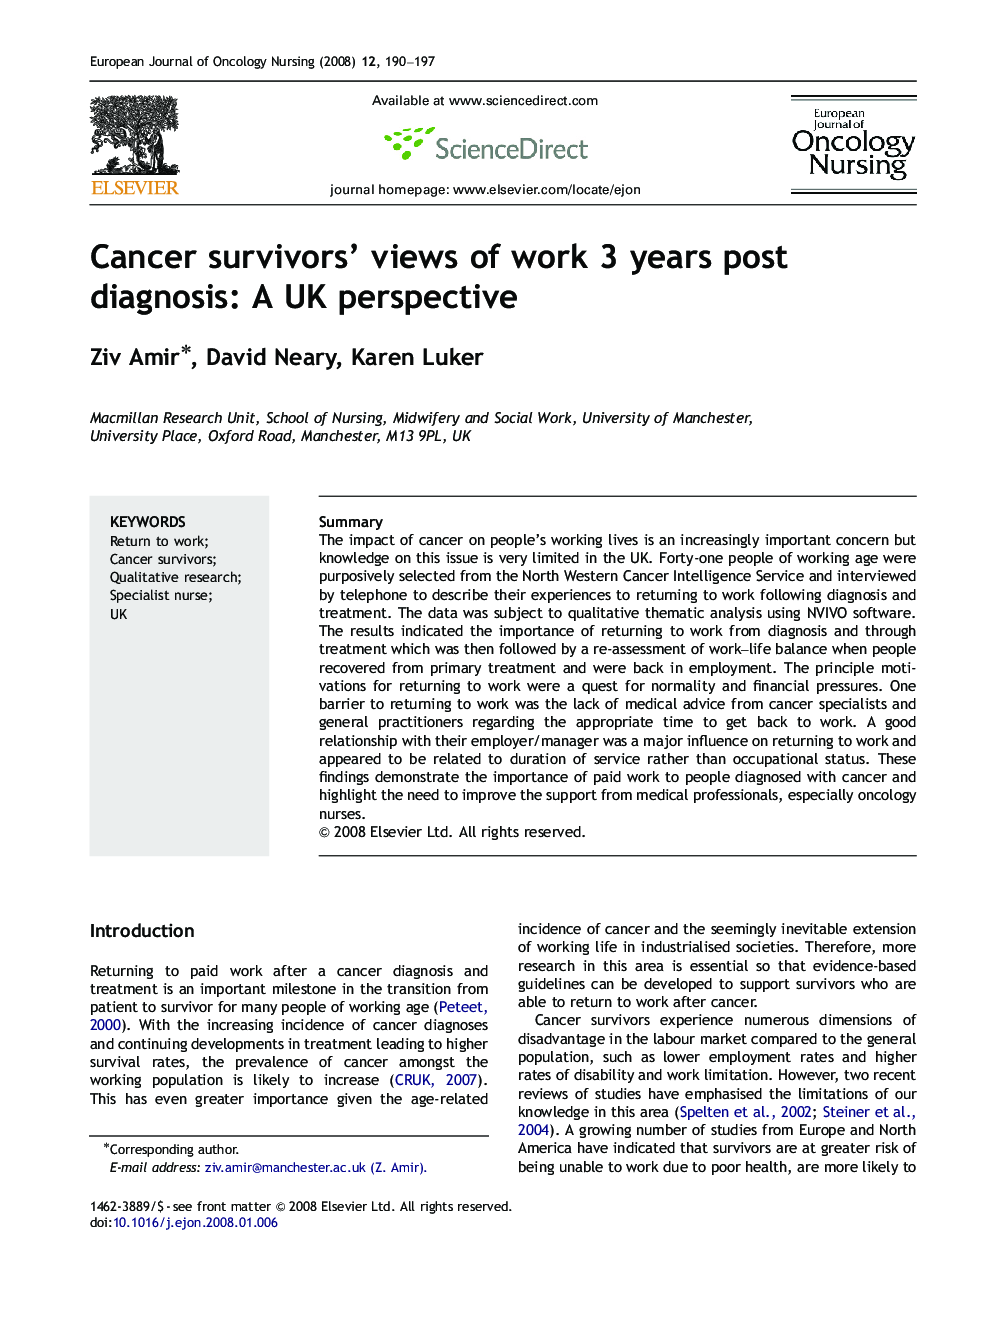 Cancer survivors’ views of work 3 years post diagnosis: A UK perspective